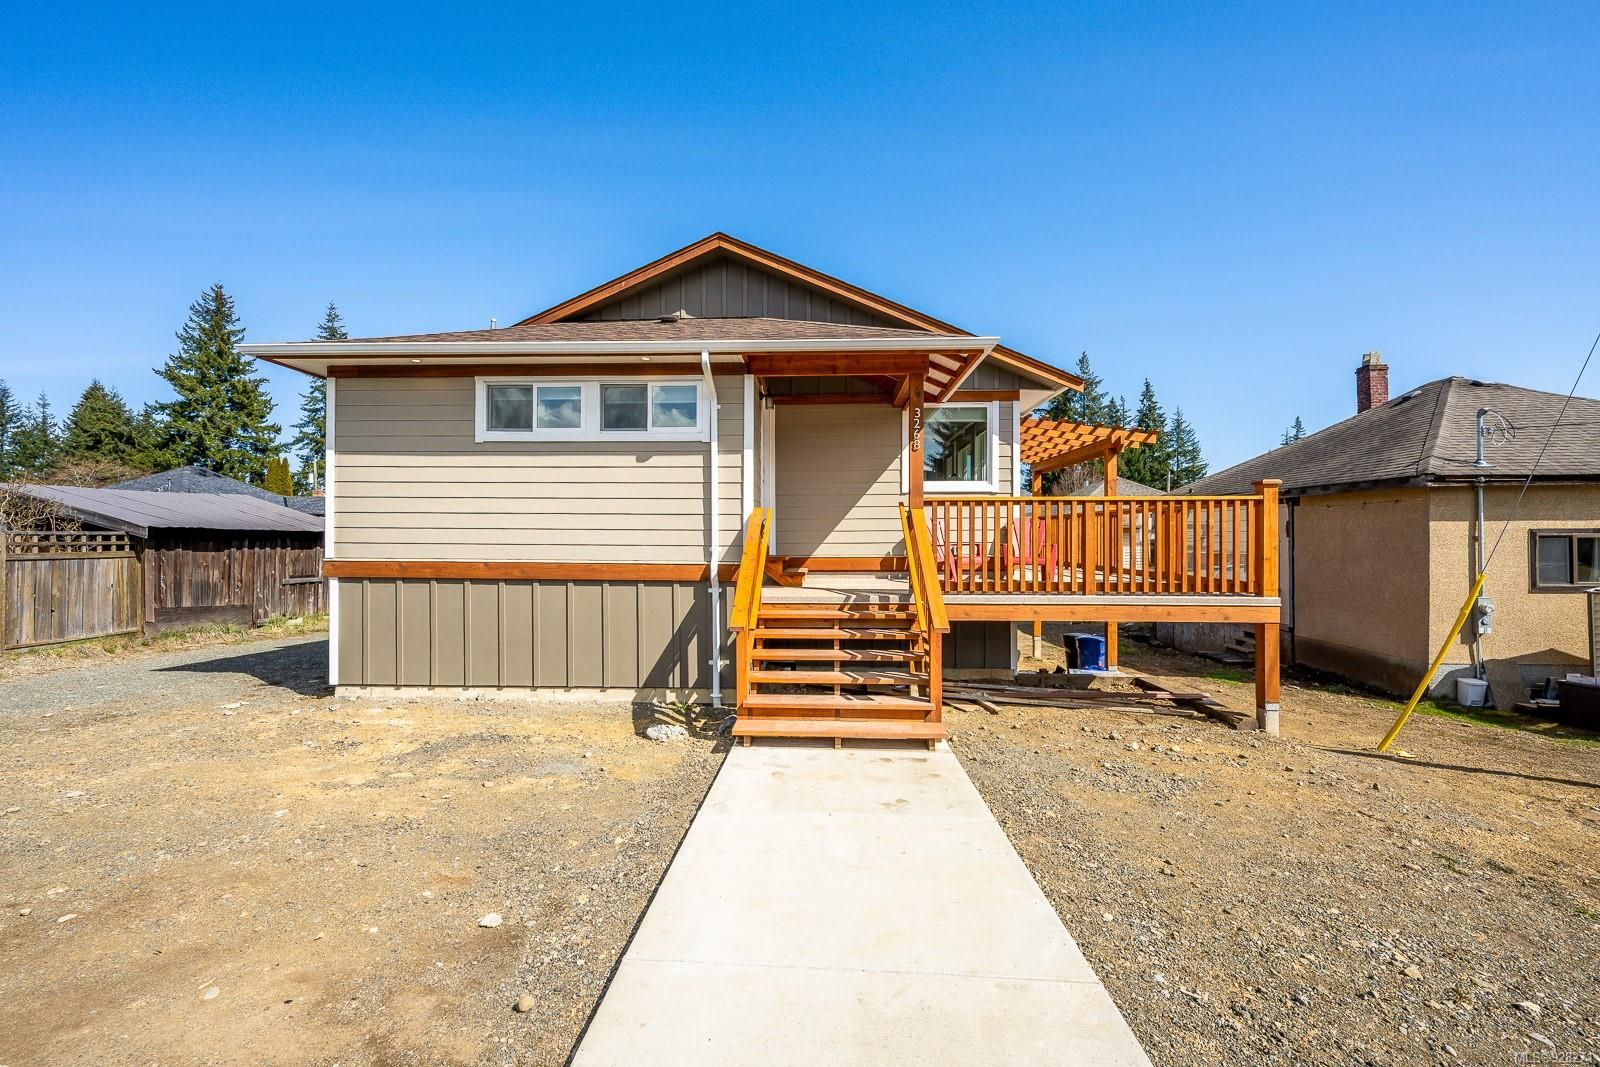 New property listed in CV Cumberland, Comox Valley